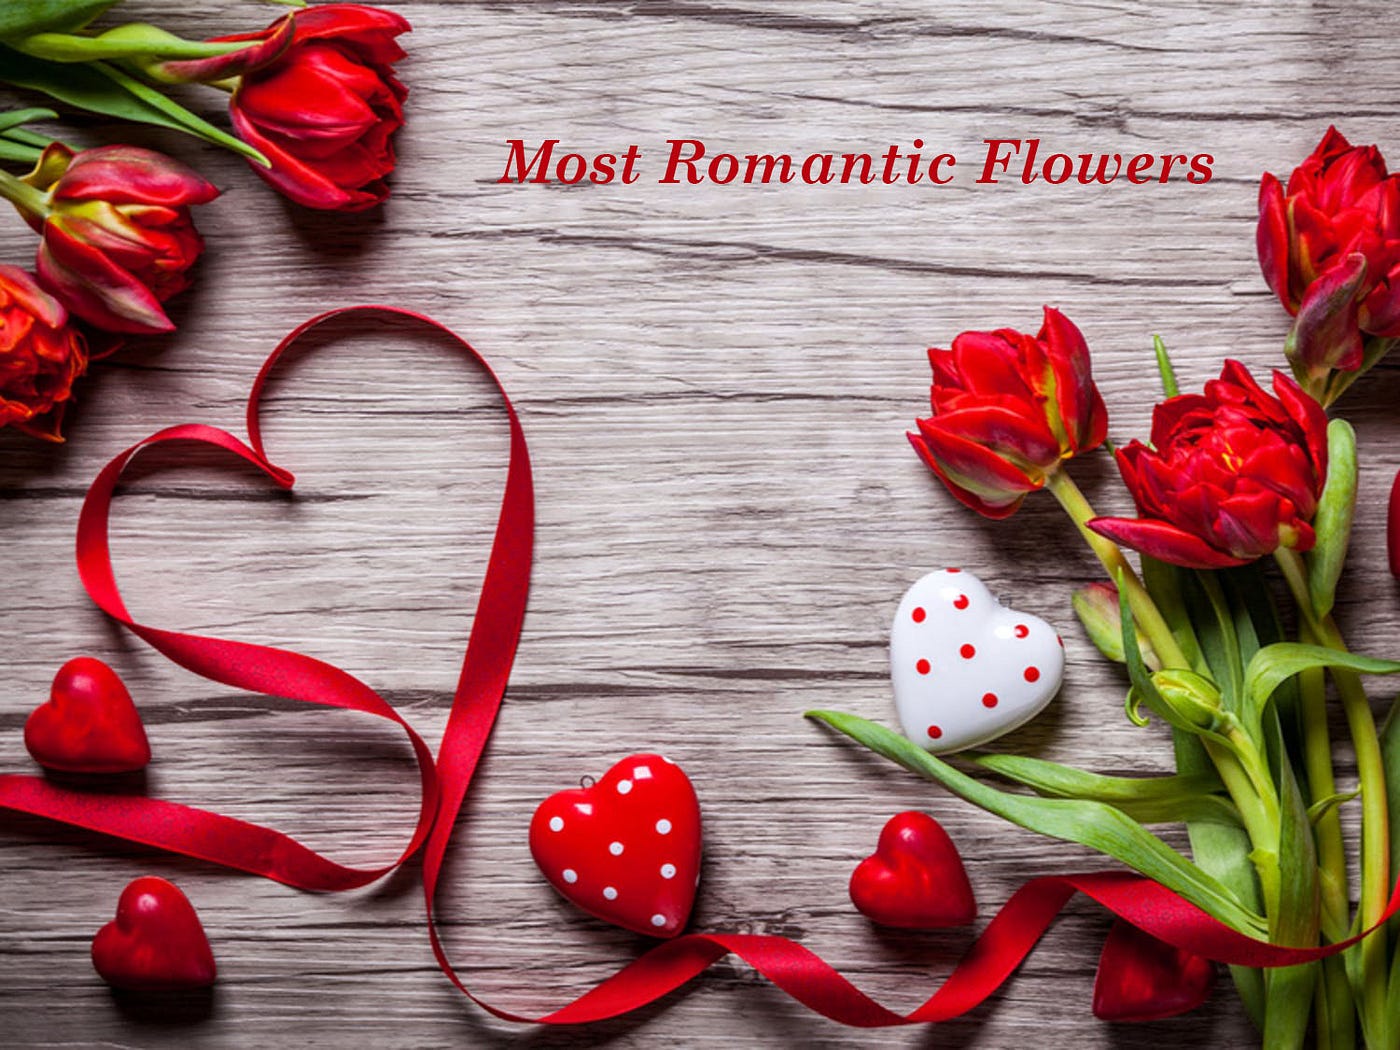 Romantic Valentine’s Day Flowers to Impress Your Loved One